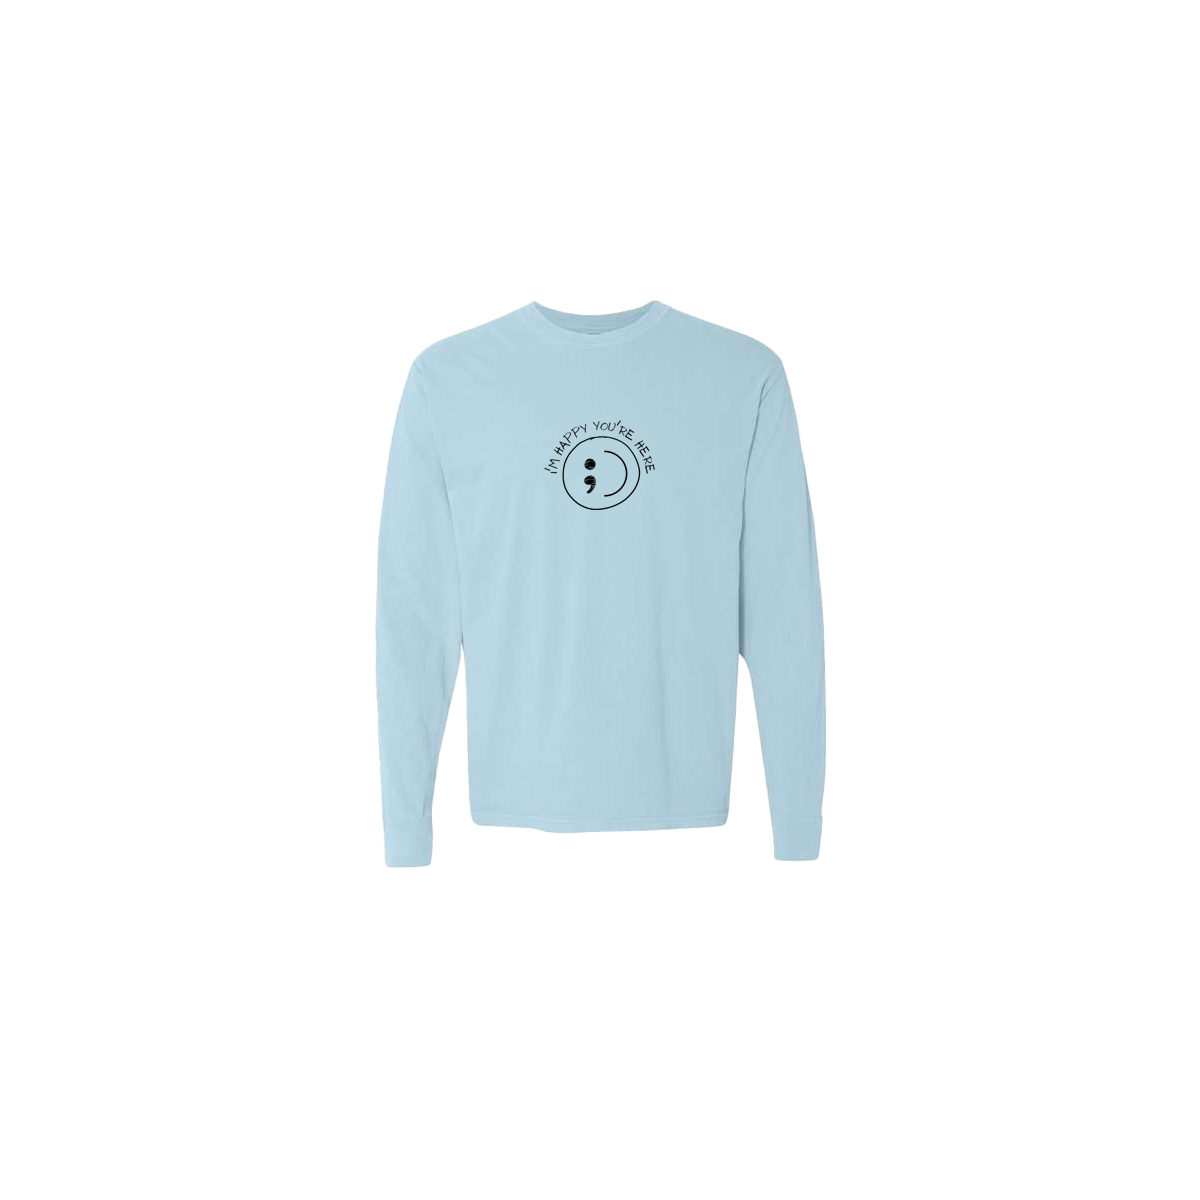 I'm Happy You're Here Embroidered Light Blue Long Sleeve Tshirt - Mental Health Awareness Clothing